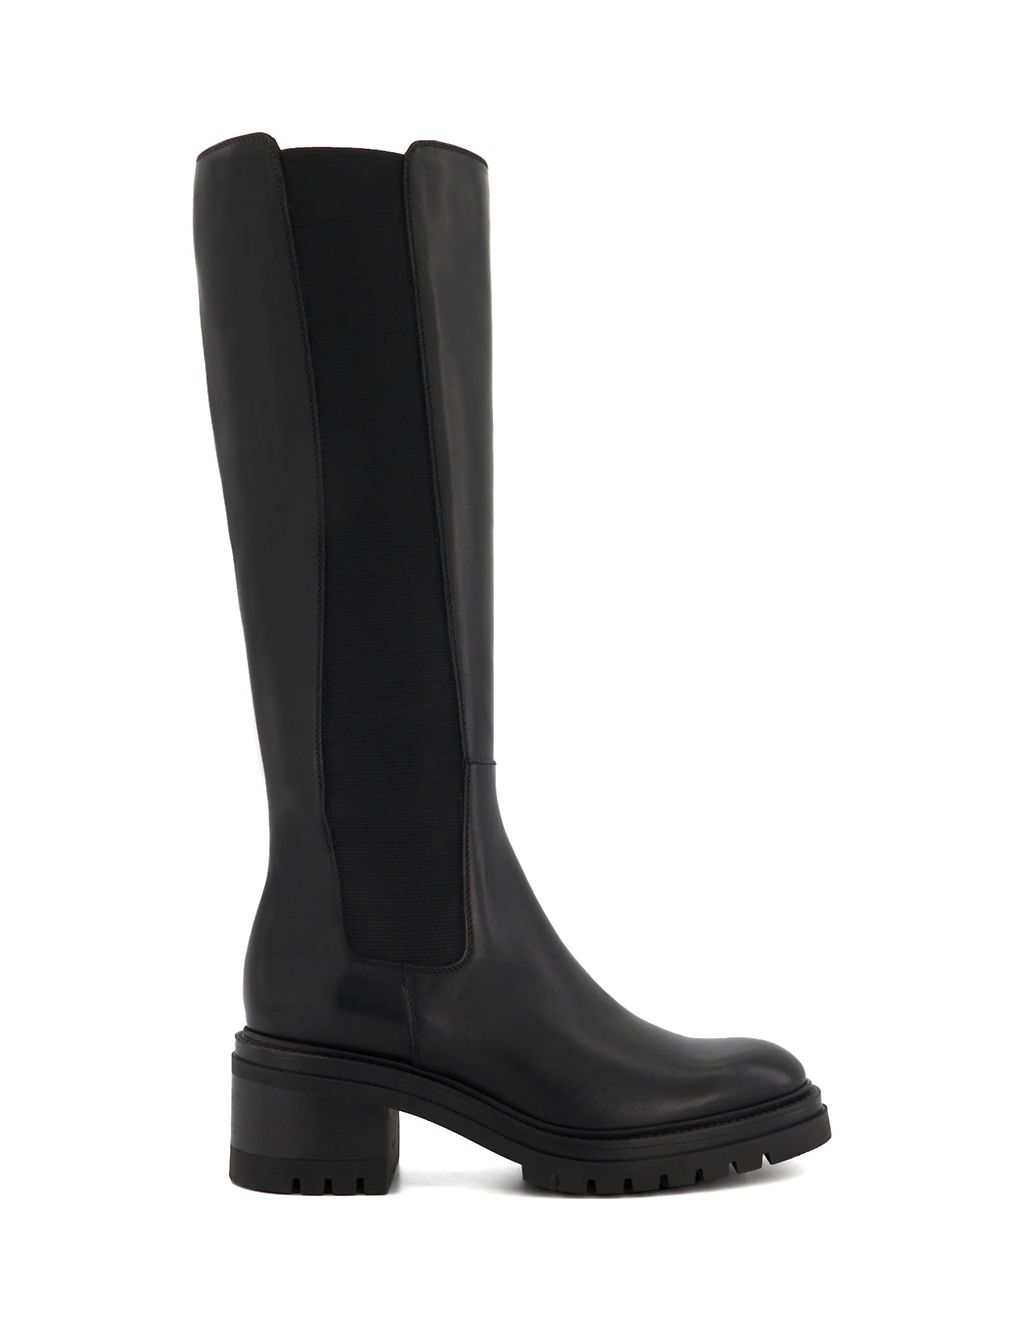 Leather Cleated Block Heel Knee High Boots 3 of 4